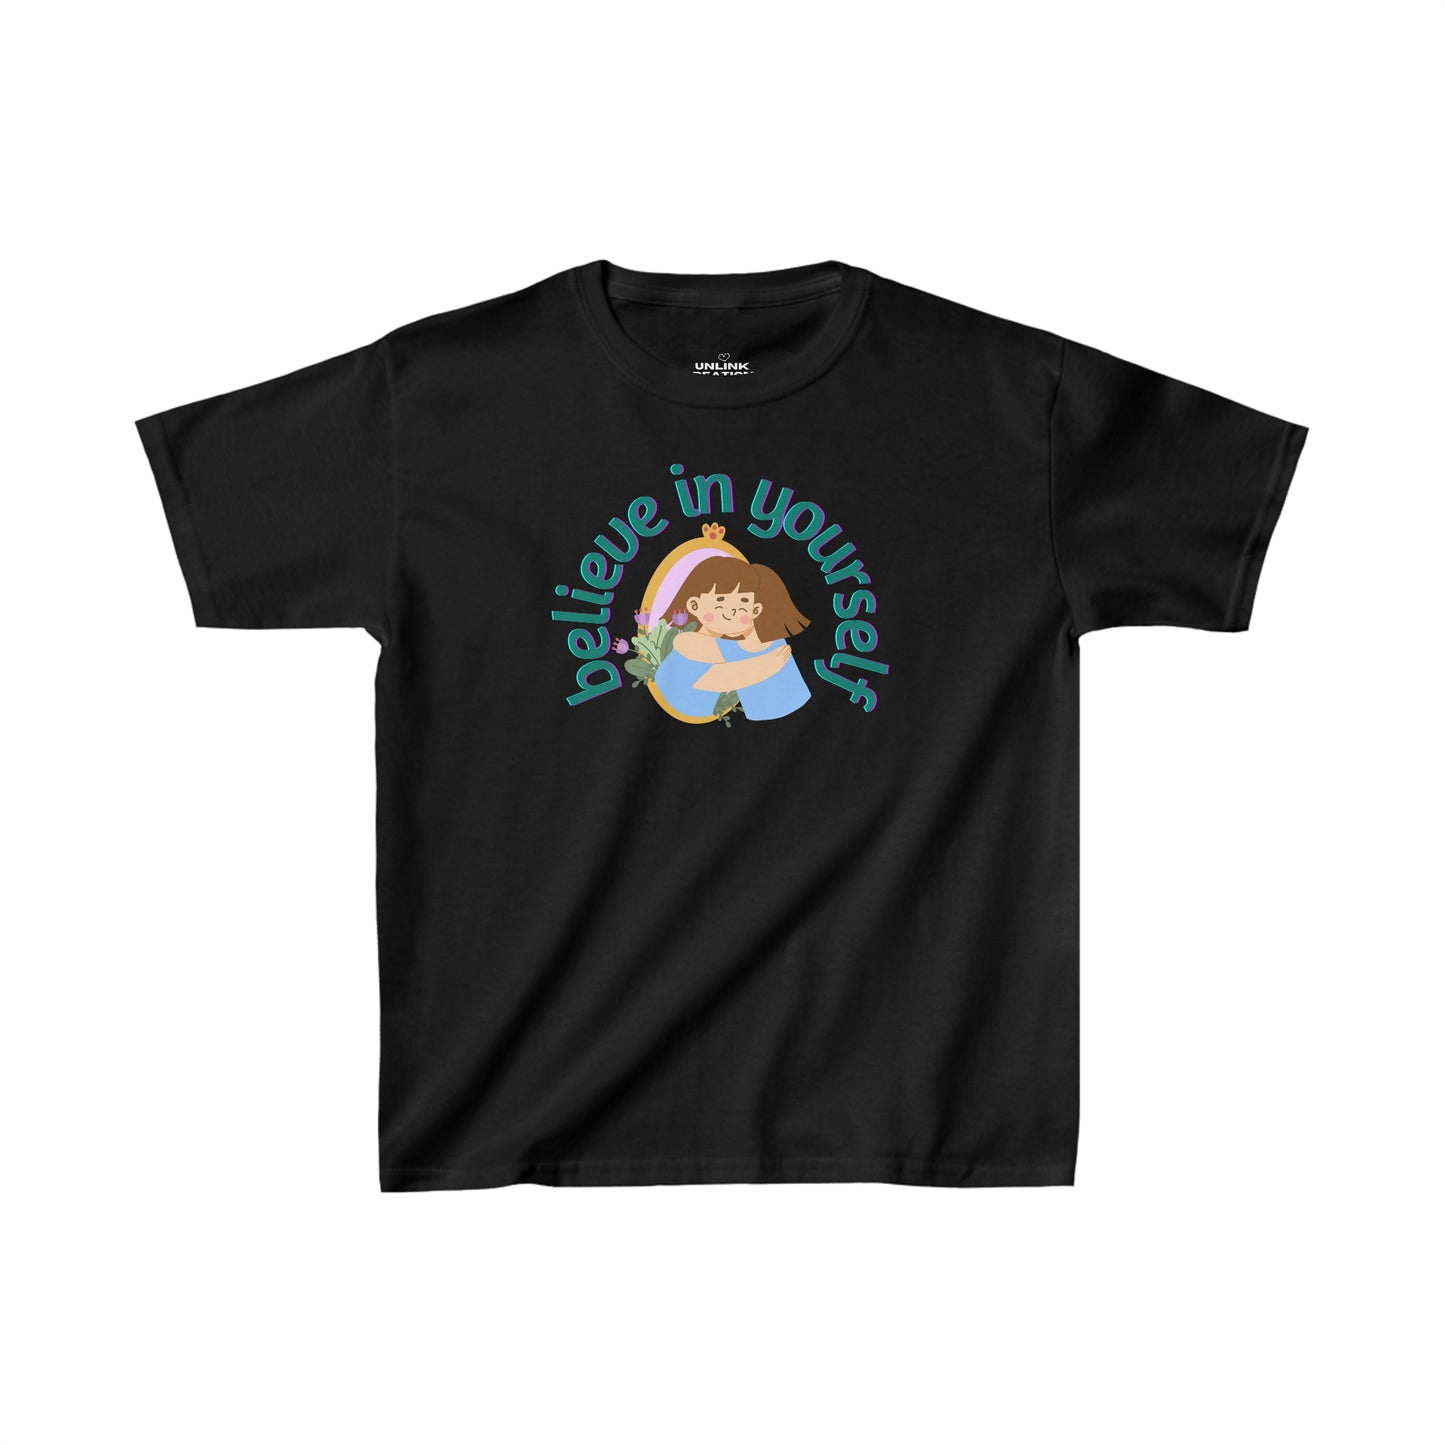 Give yourself a hug and believe in yourself message on this Kids Heavy Cotton™ Tee